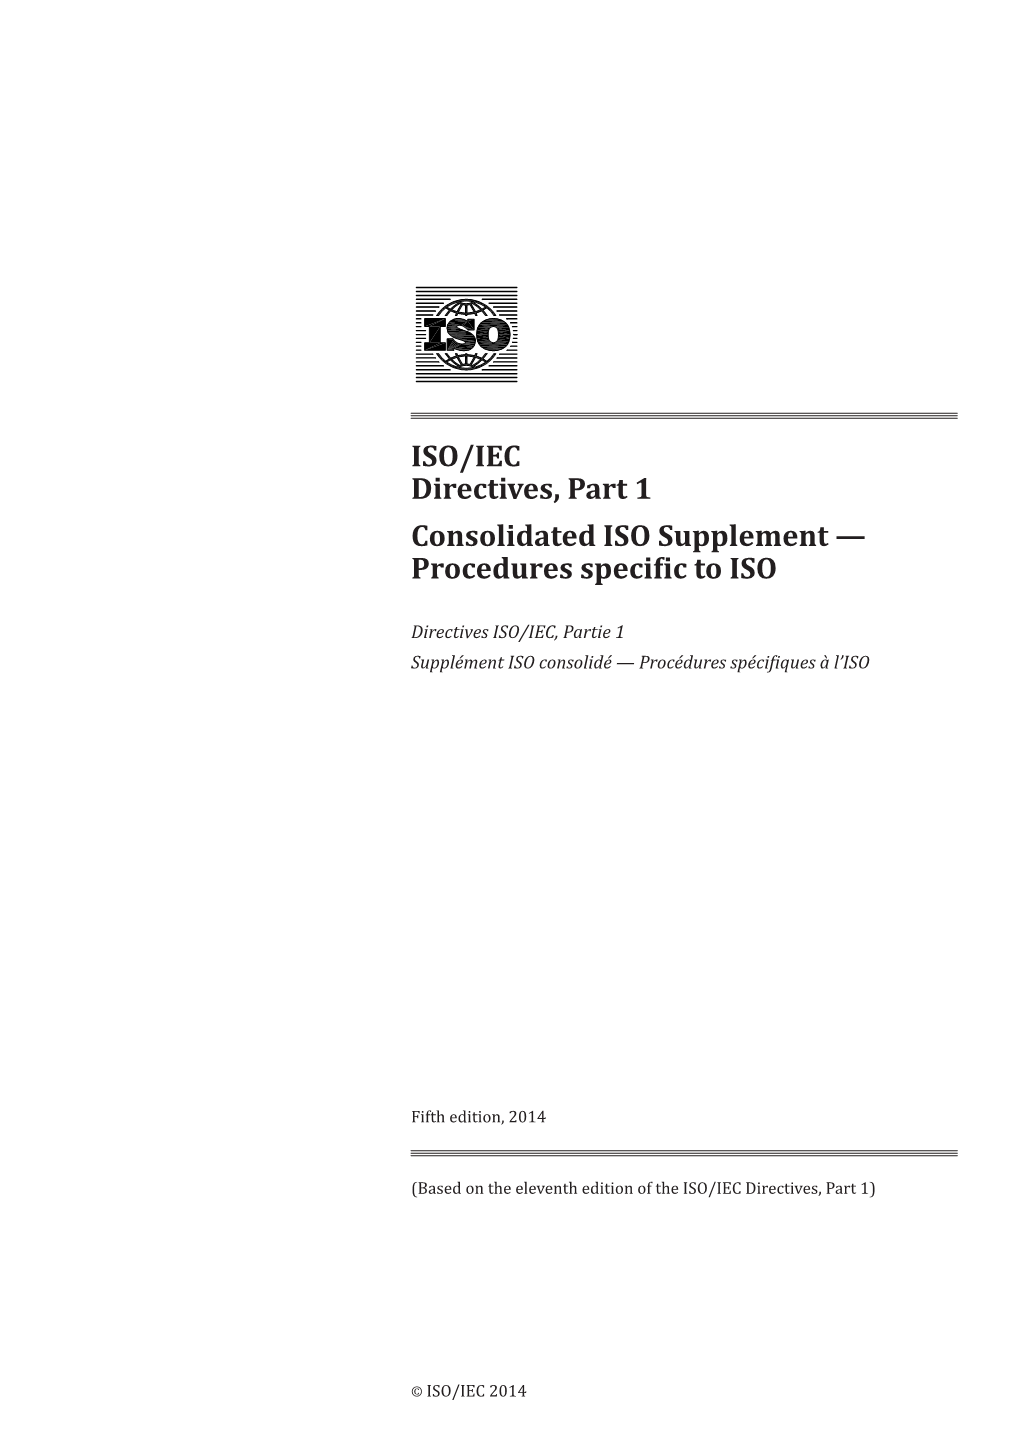 ISO/IEC Directives, Part 1 Consolidated ISO Supplement — Procedures Specific to ISO